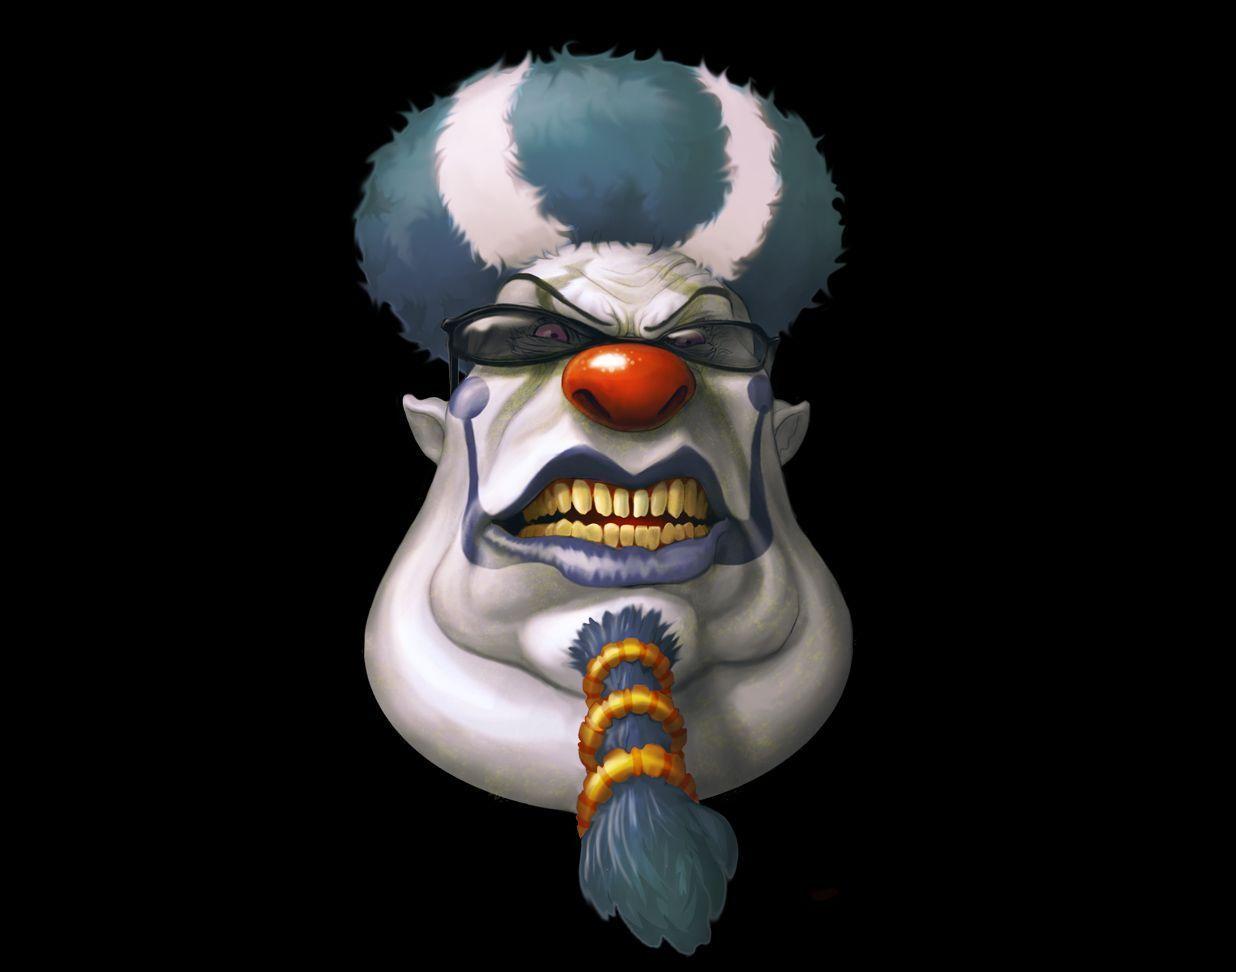 Scary clown wallpaper. Clickandseeworld is all about Funny. Amazing